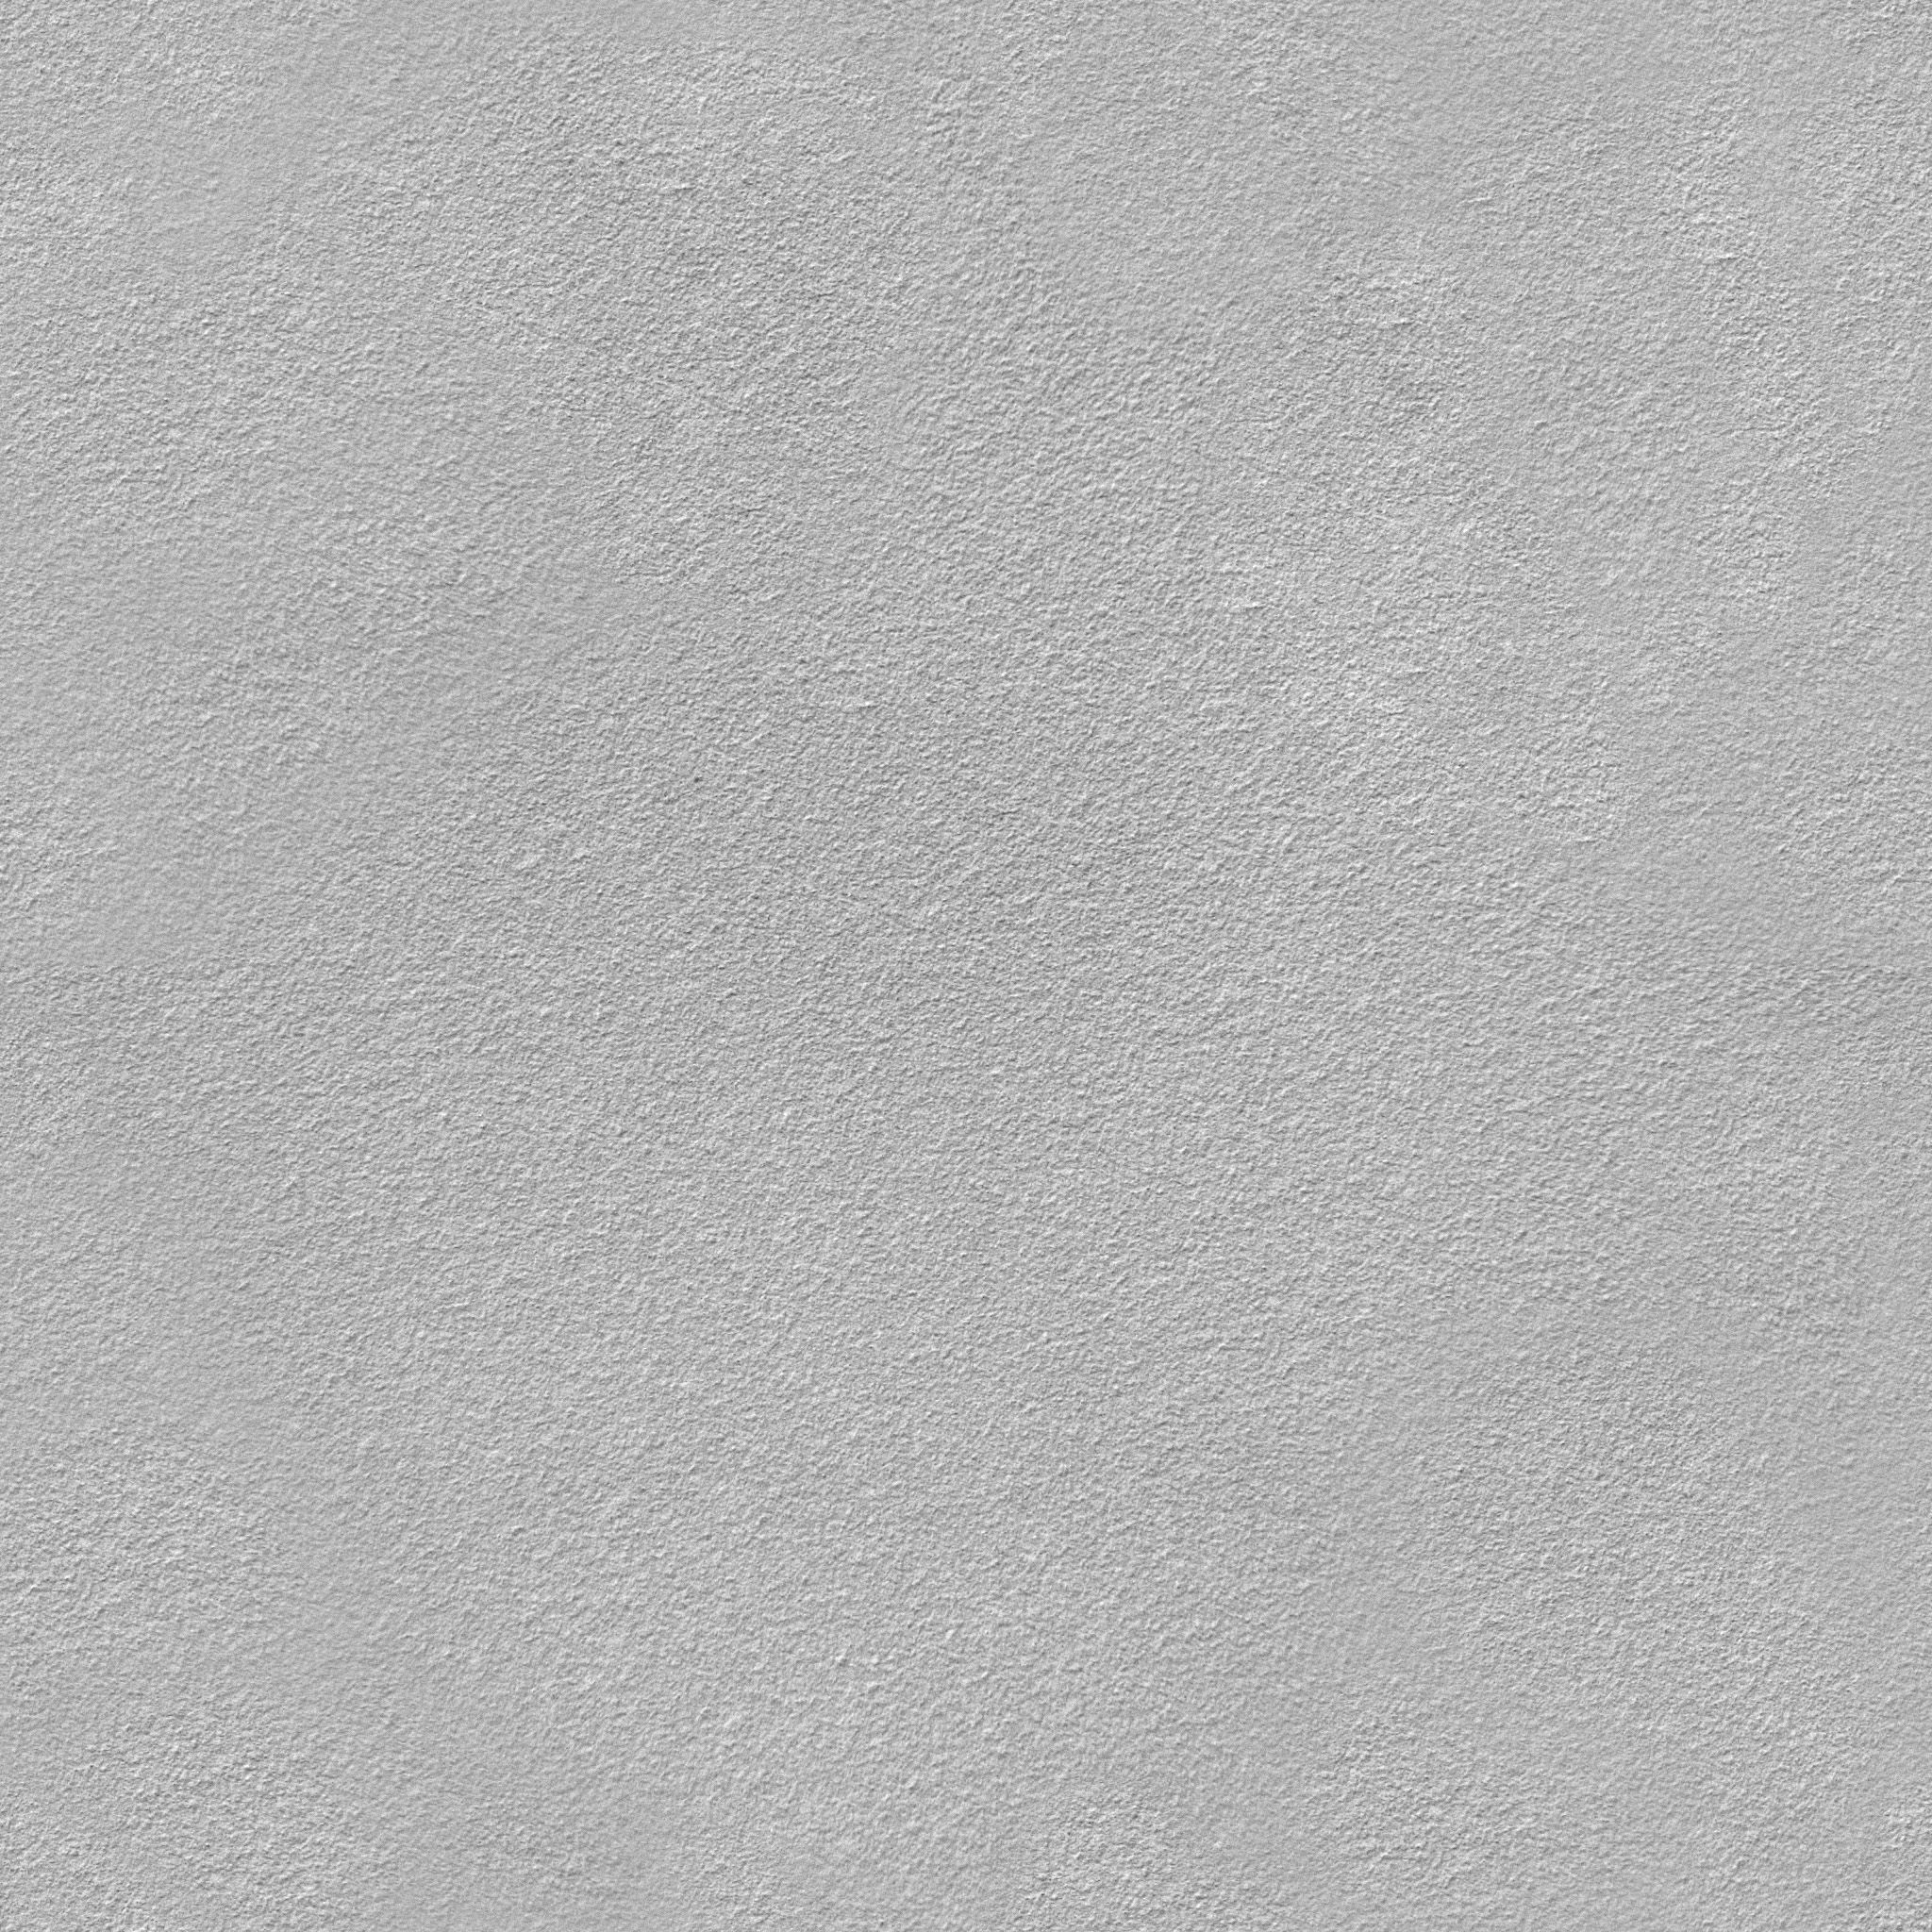 Concrete Wall Texture Seamless 1 21198 | discoverlist.co